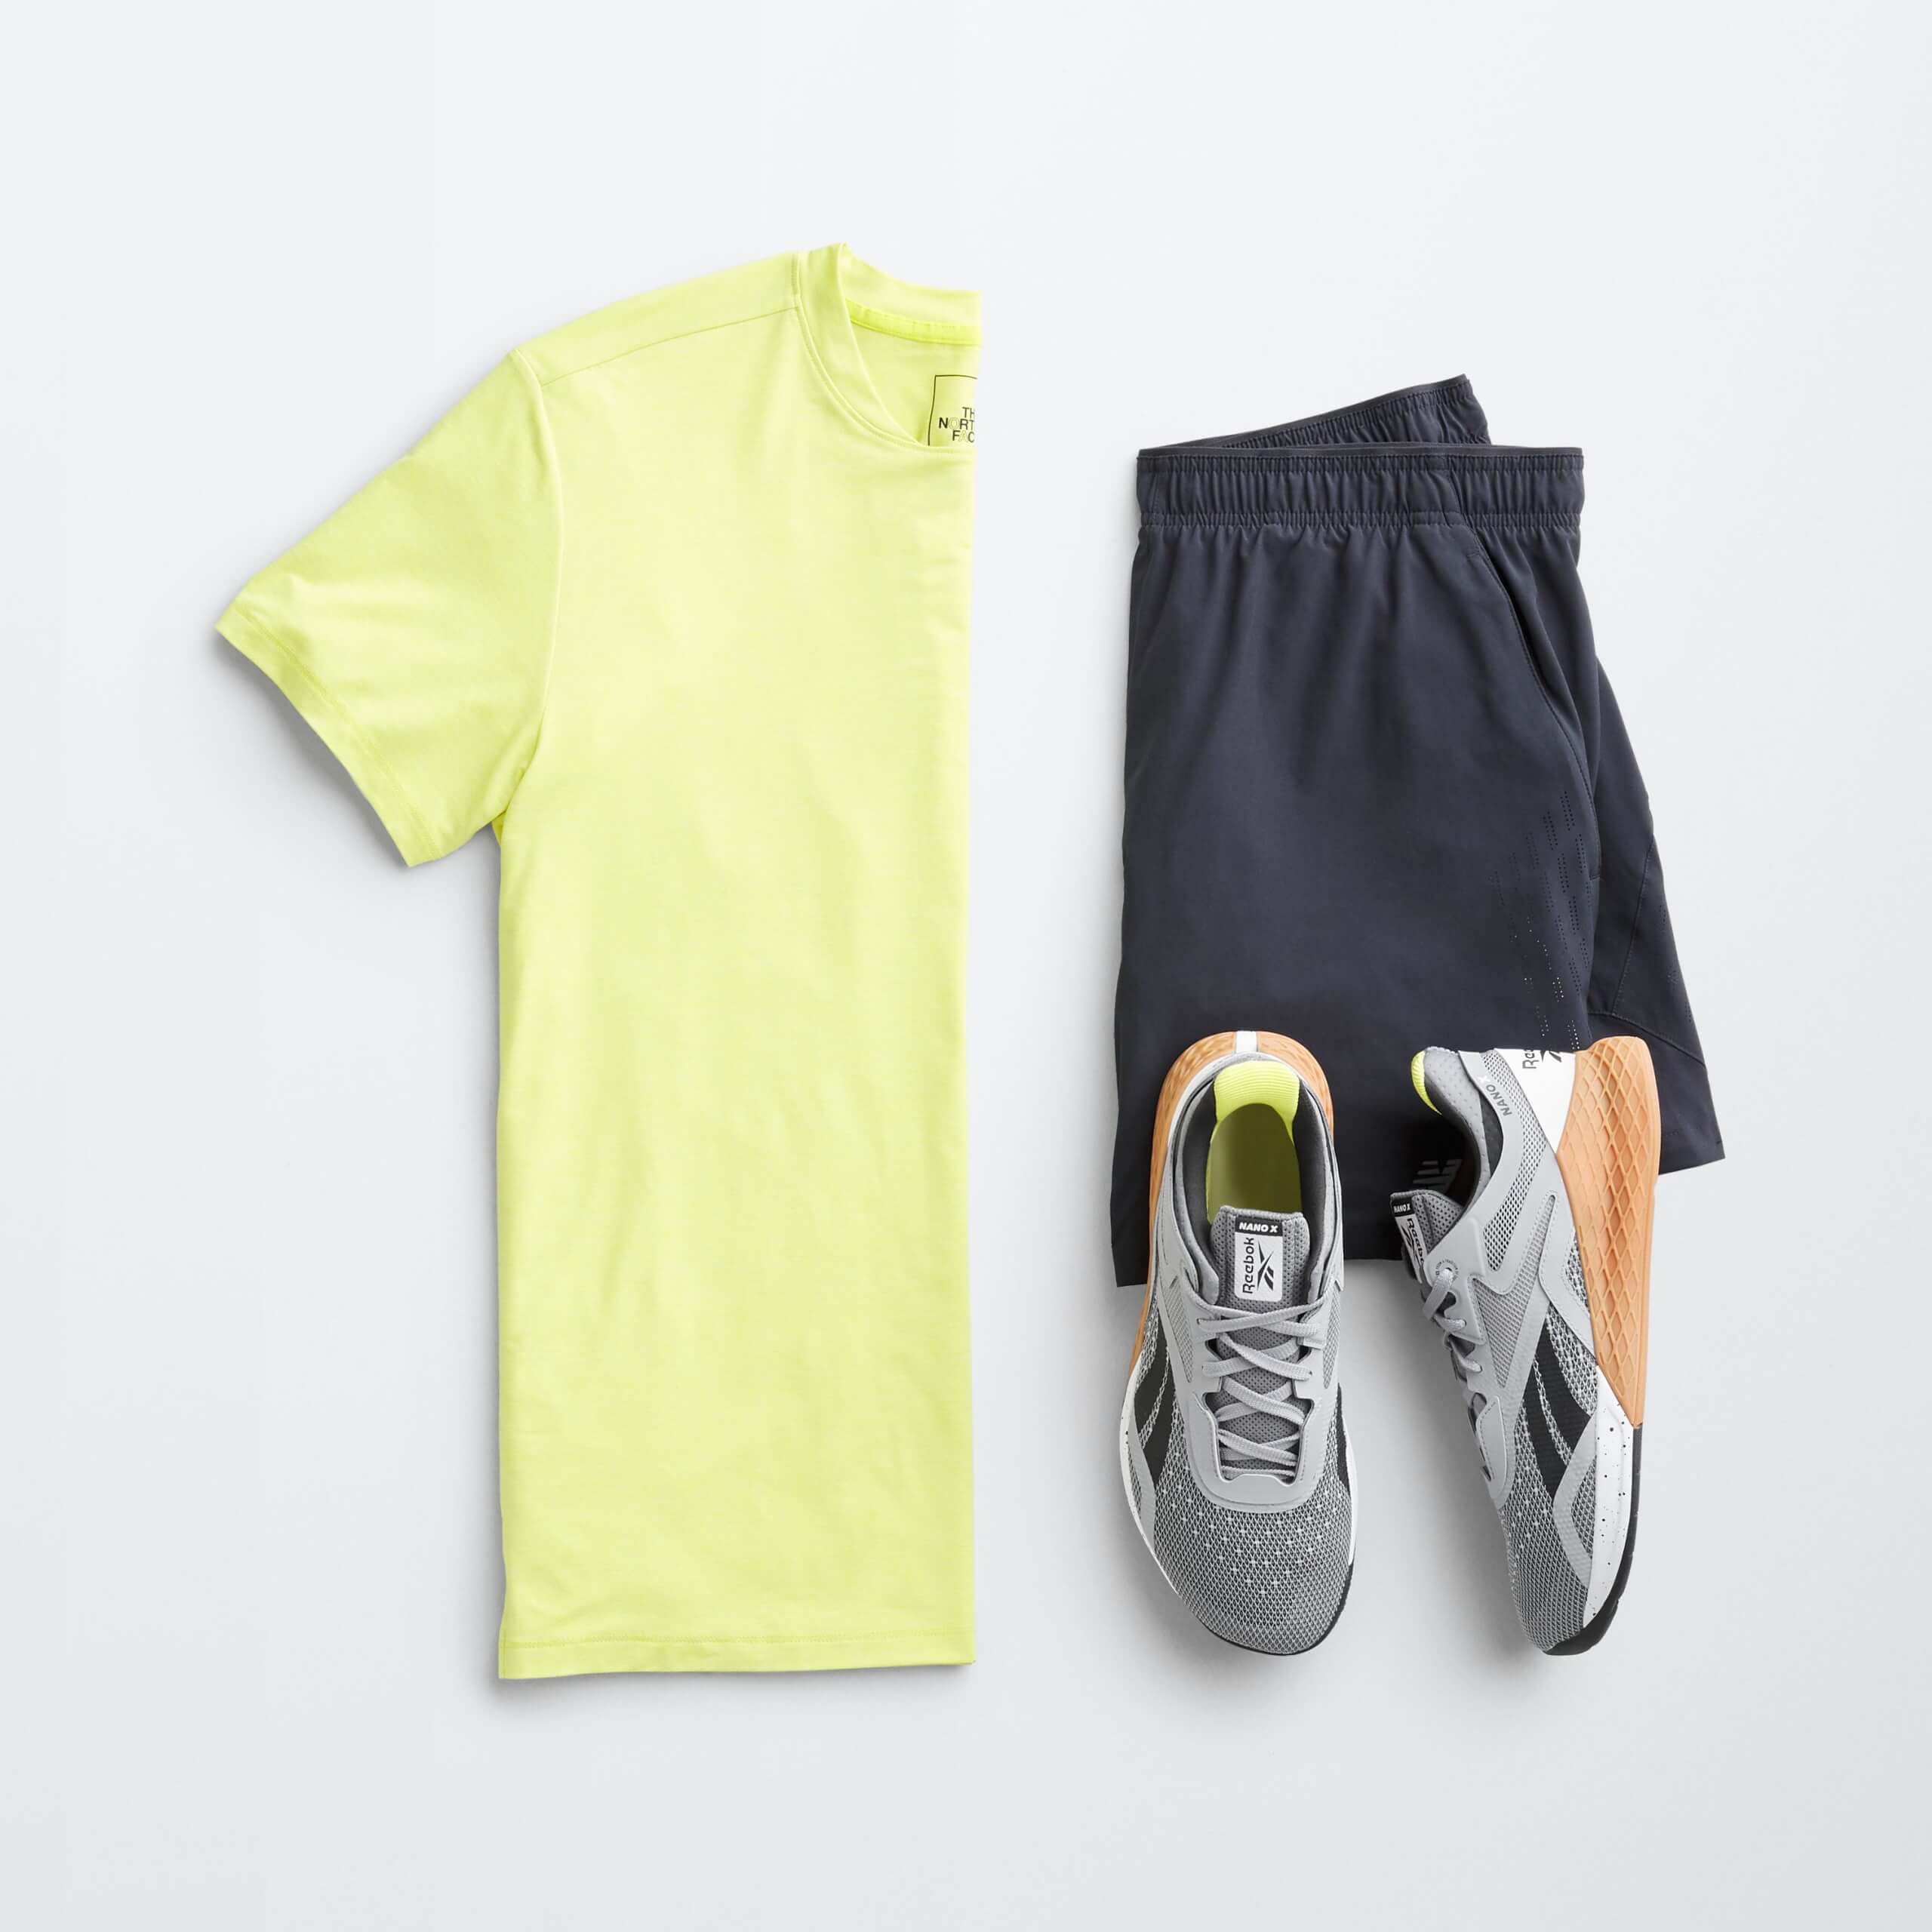 Stitch Fix men’s outfit laydown featuring neon yellow T-shirt, black elastic shorts and multi-colored sneakers.